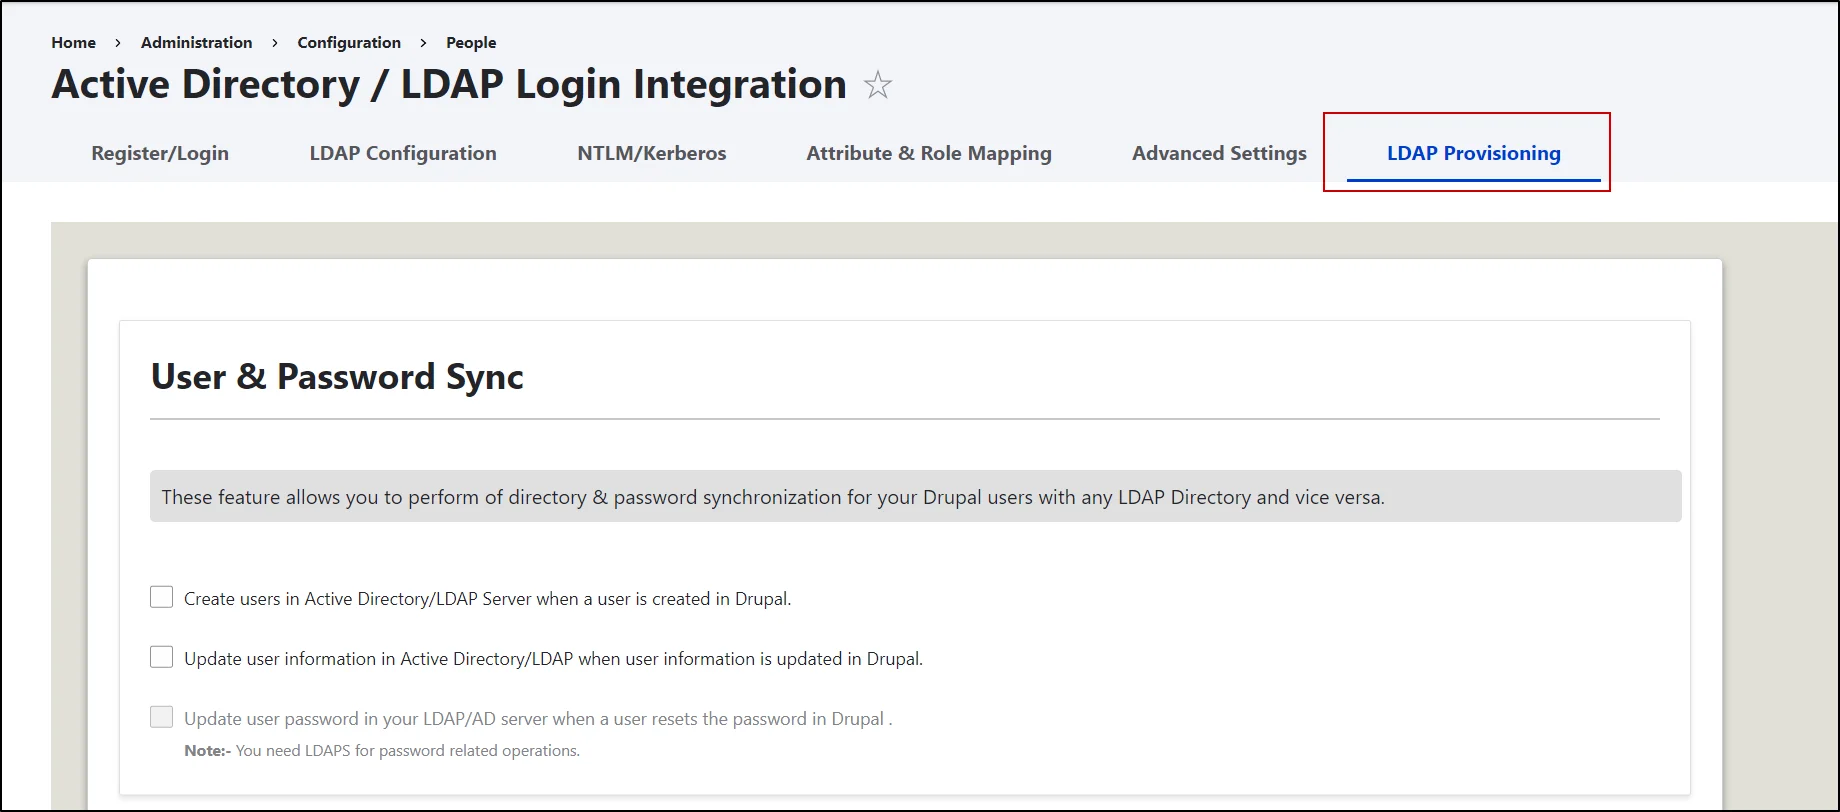 DImport users from LDAP to Drupal - Go to the LDAP Provisioning tab